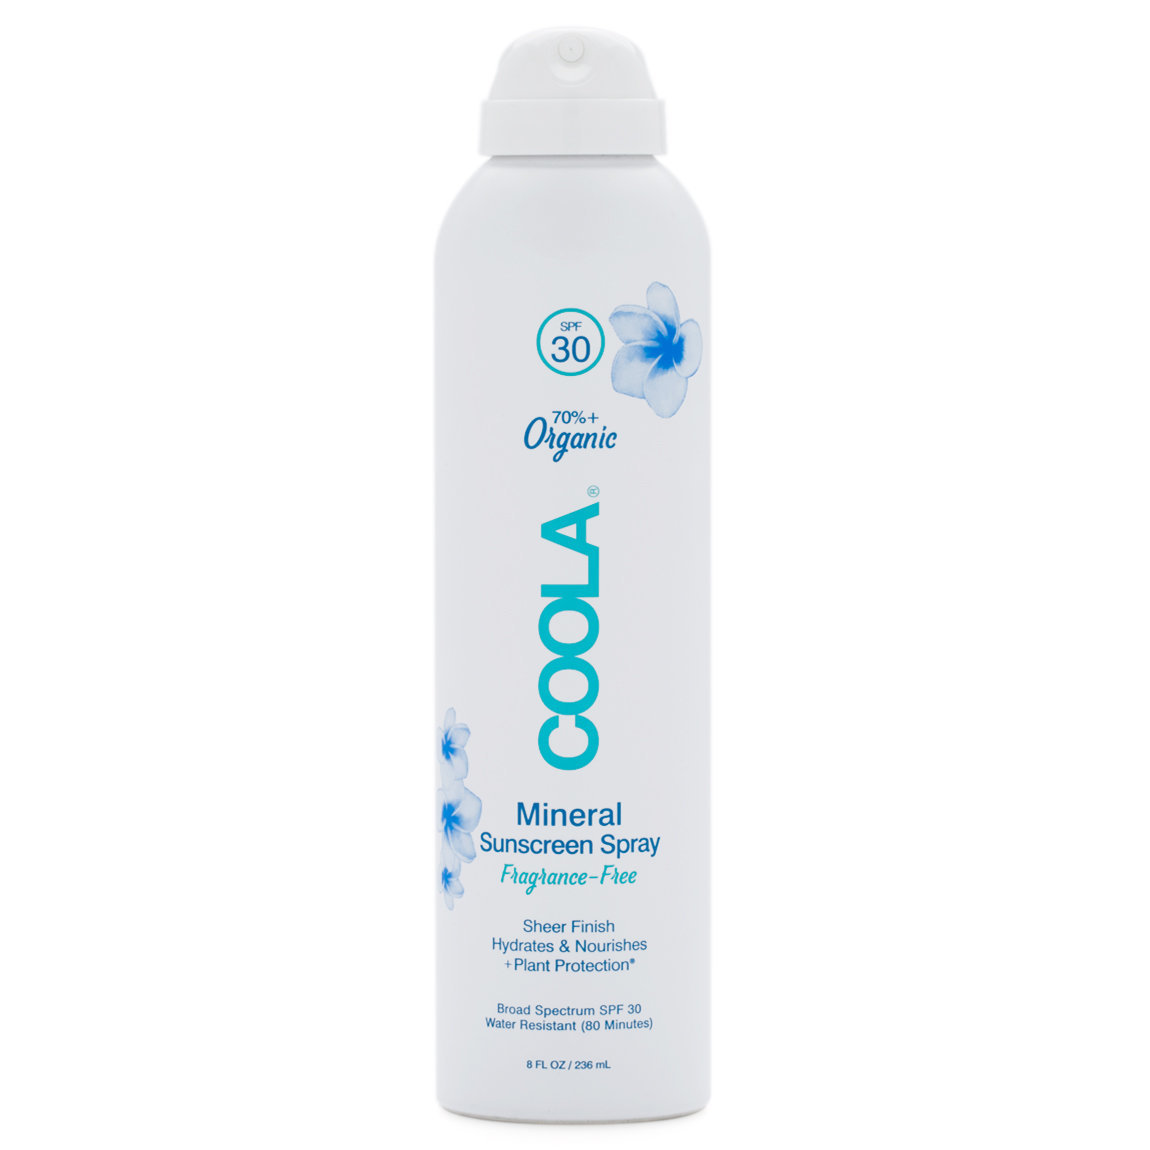 coola sunscreen mineral